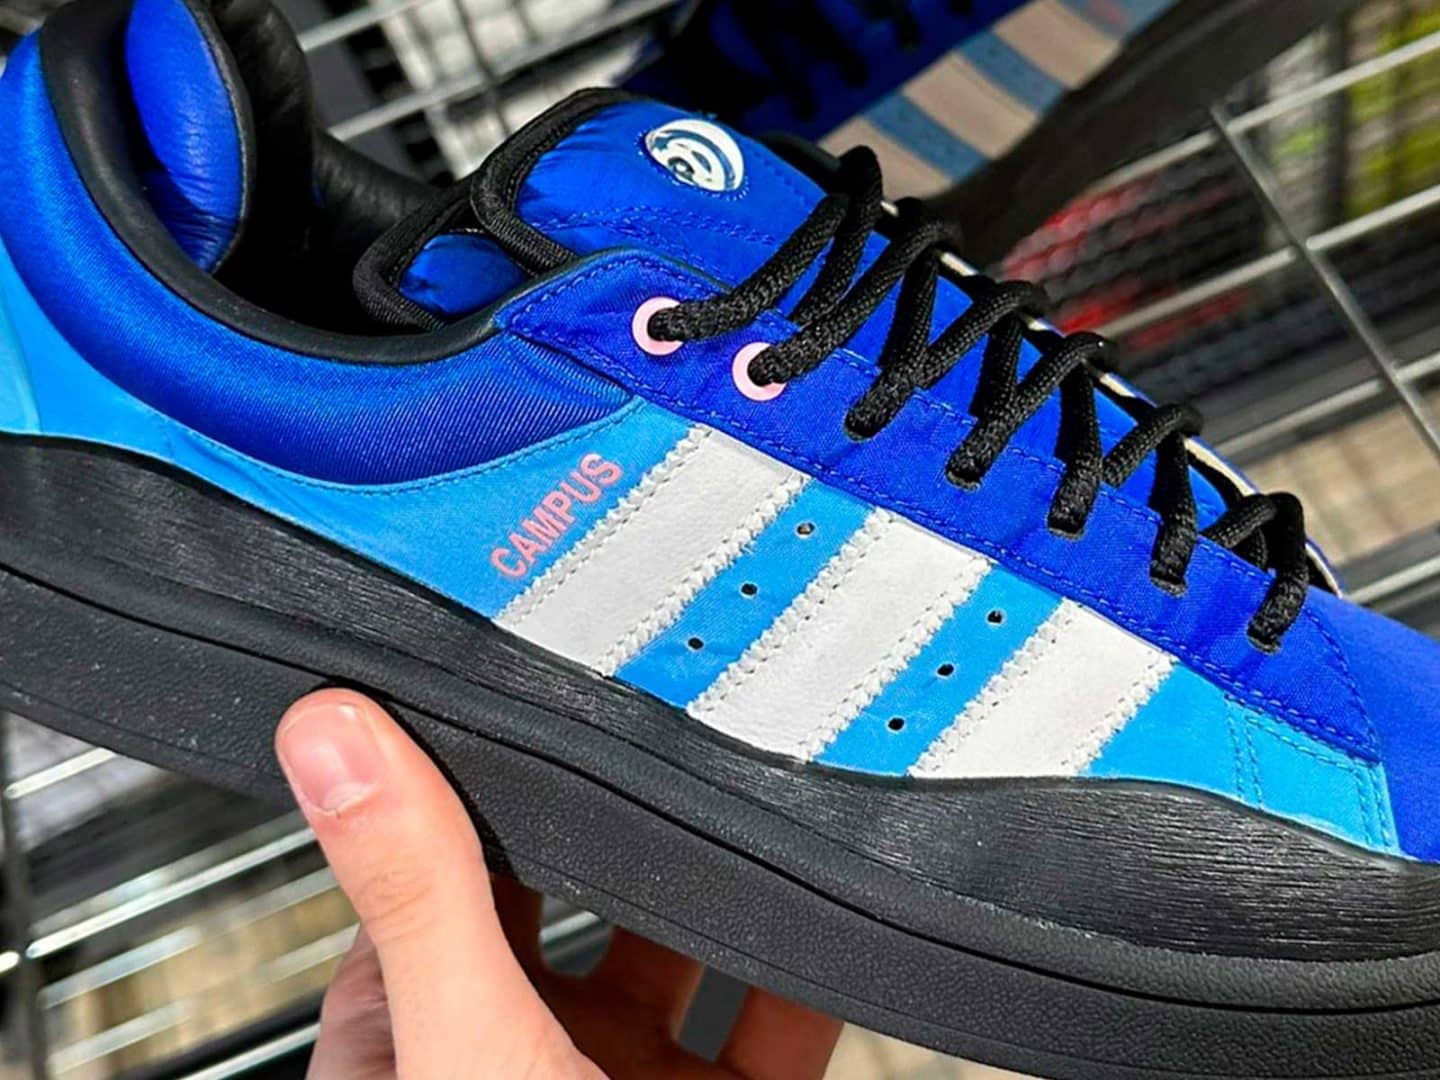 The adidas Campus Light by Bad Bunny arrives in the shade ‘Royal Blue’